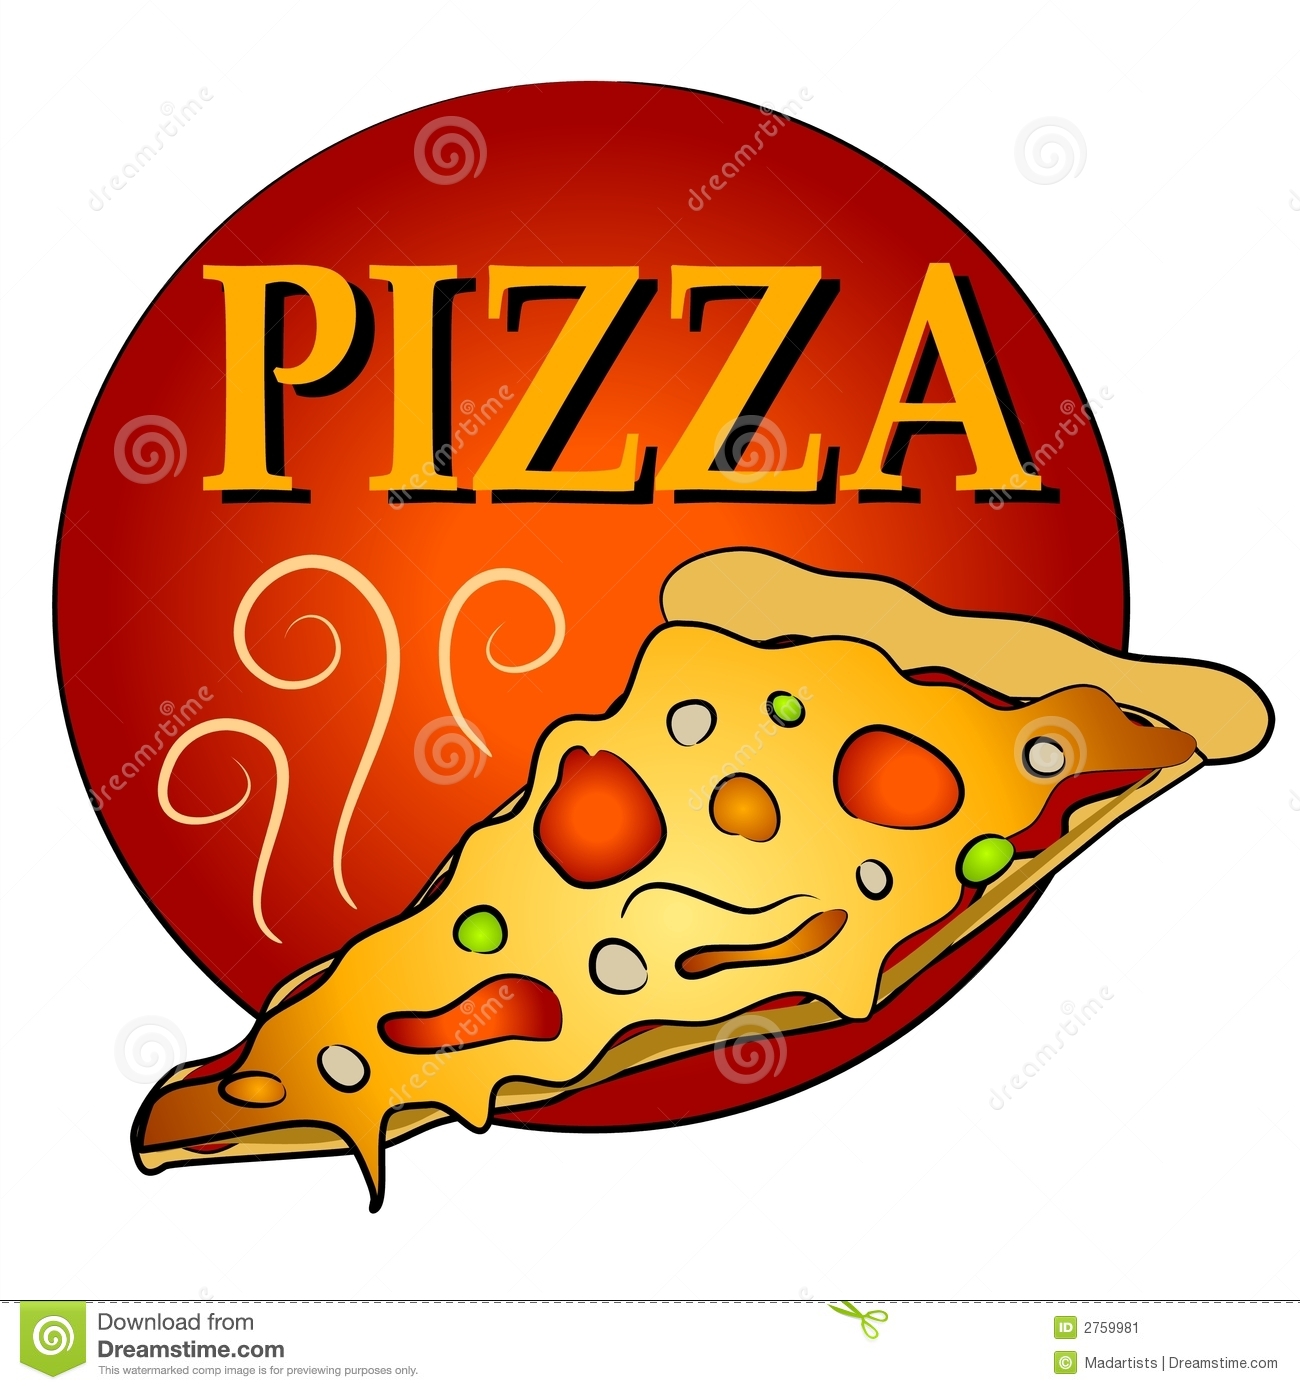 There Is 35 Cheese Pizza Slice Free Cliparts All Used For Free